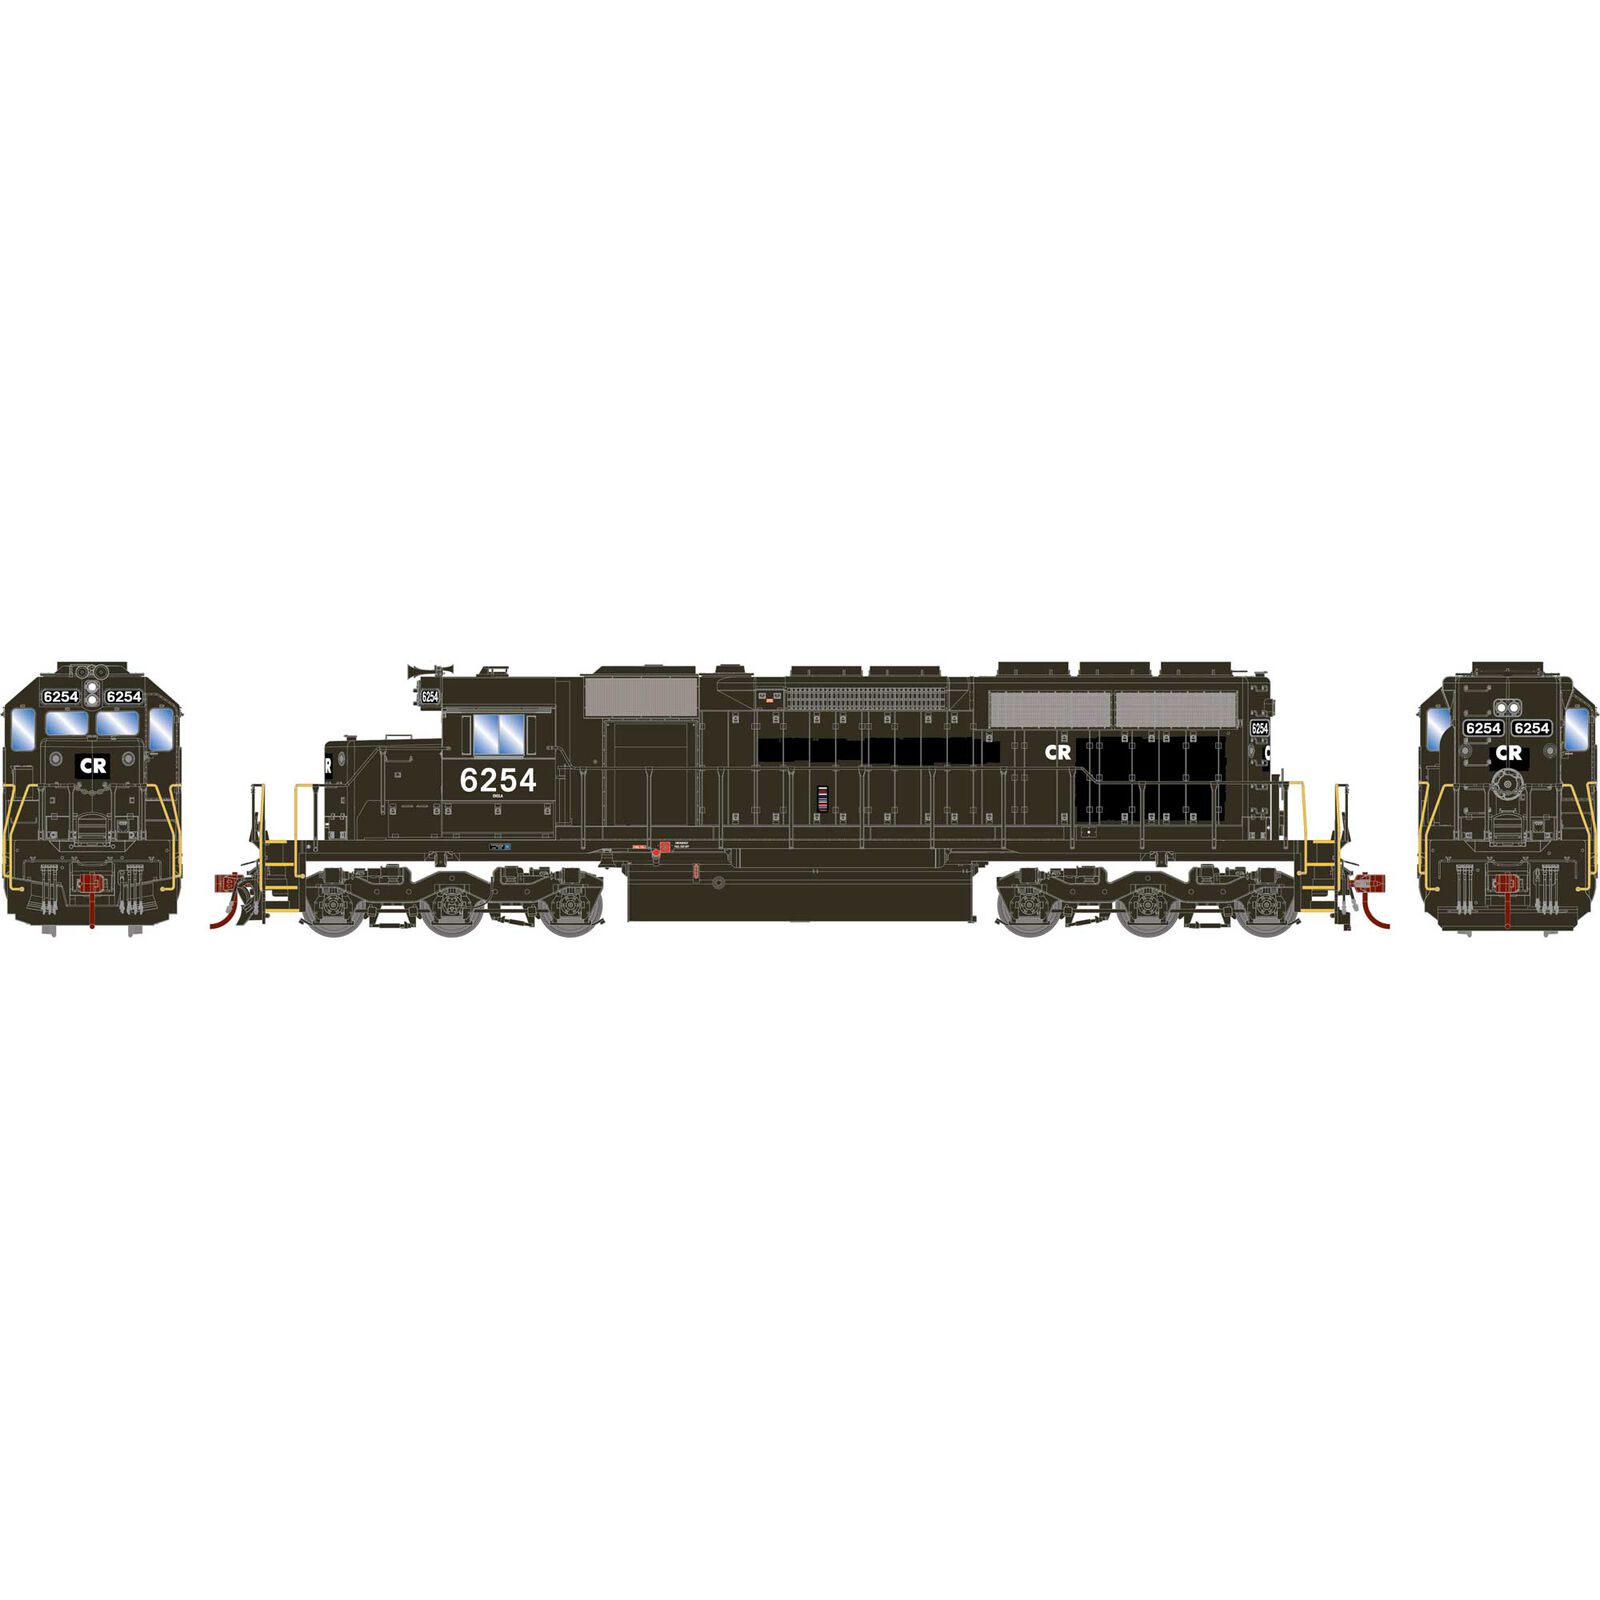 HO SD40 Locomotive, CR / PC Patched #6254